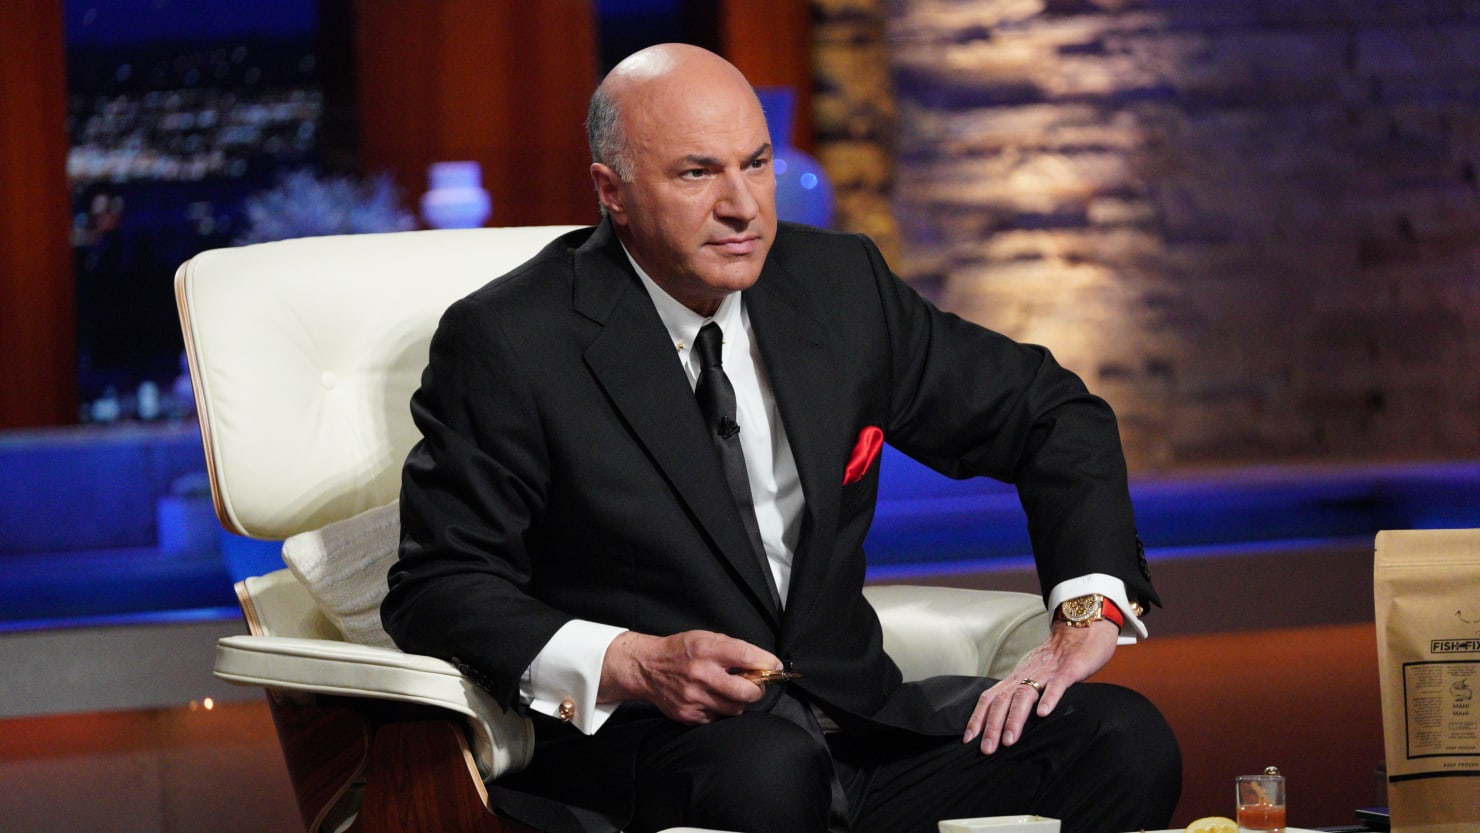 Co-Creator Of The Comfy, A 'Shark Tank' Hit, Fights To Keep